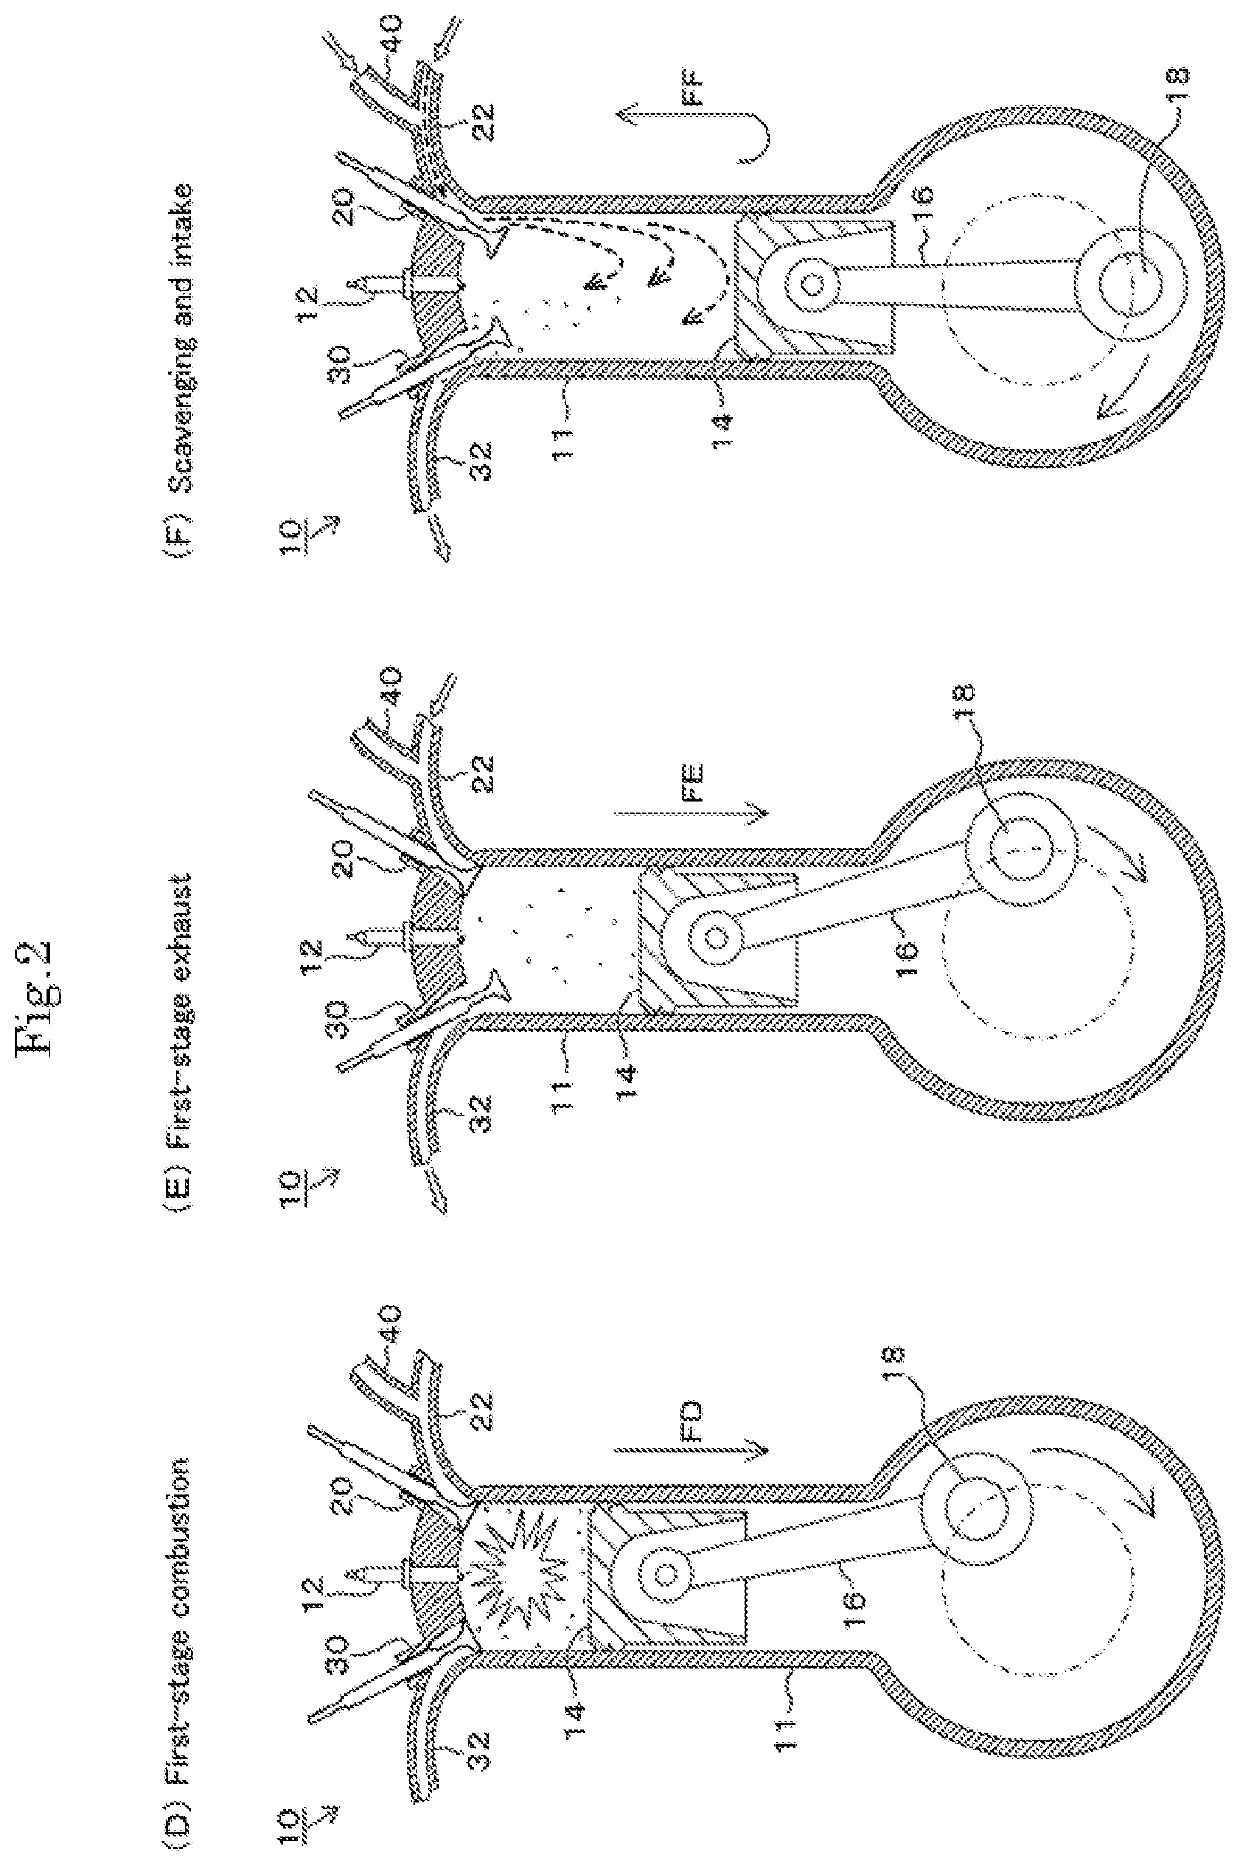 Internal-combustion engine and drive system